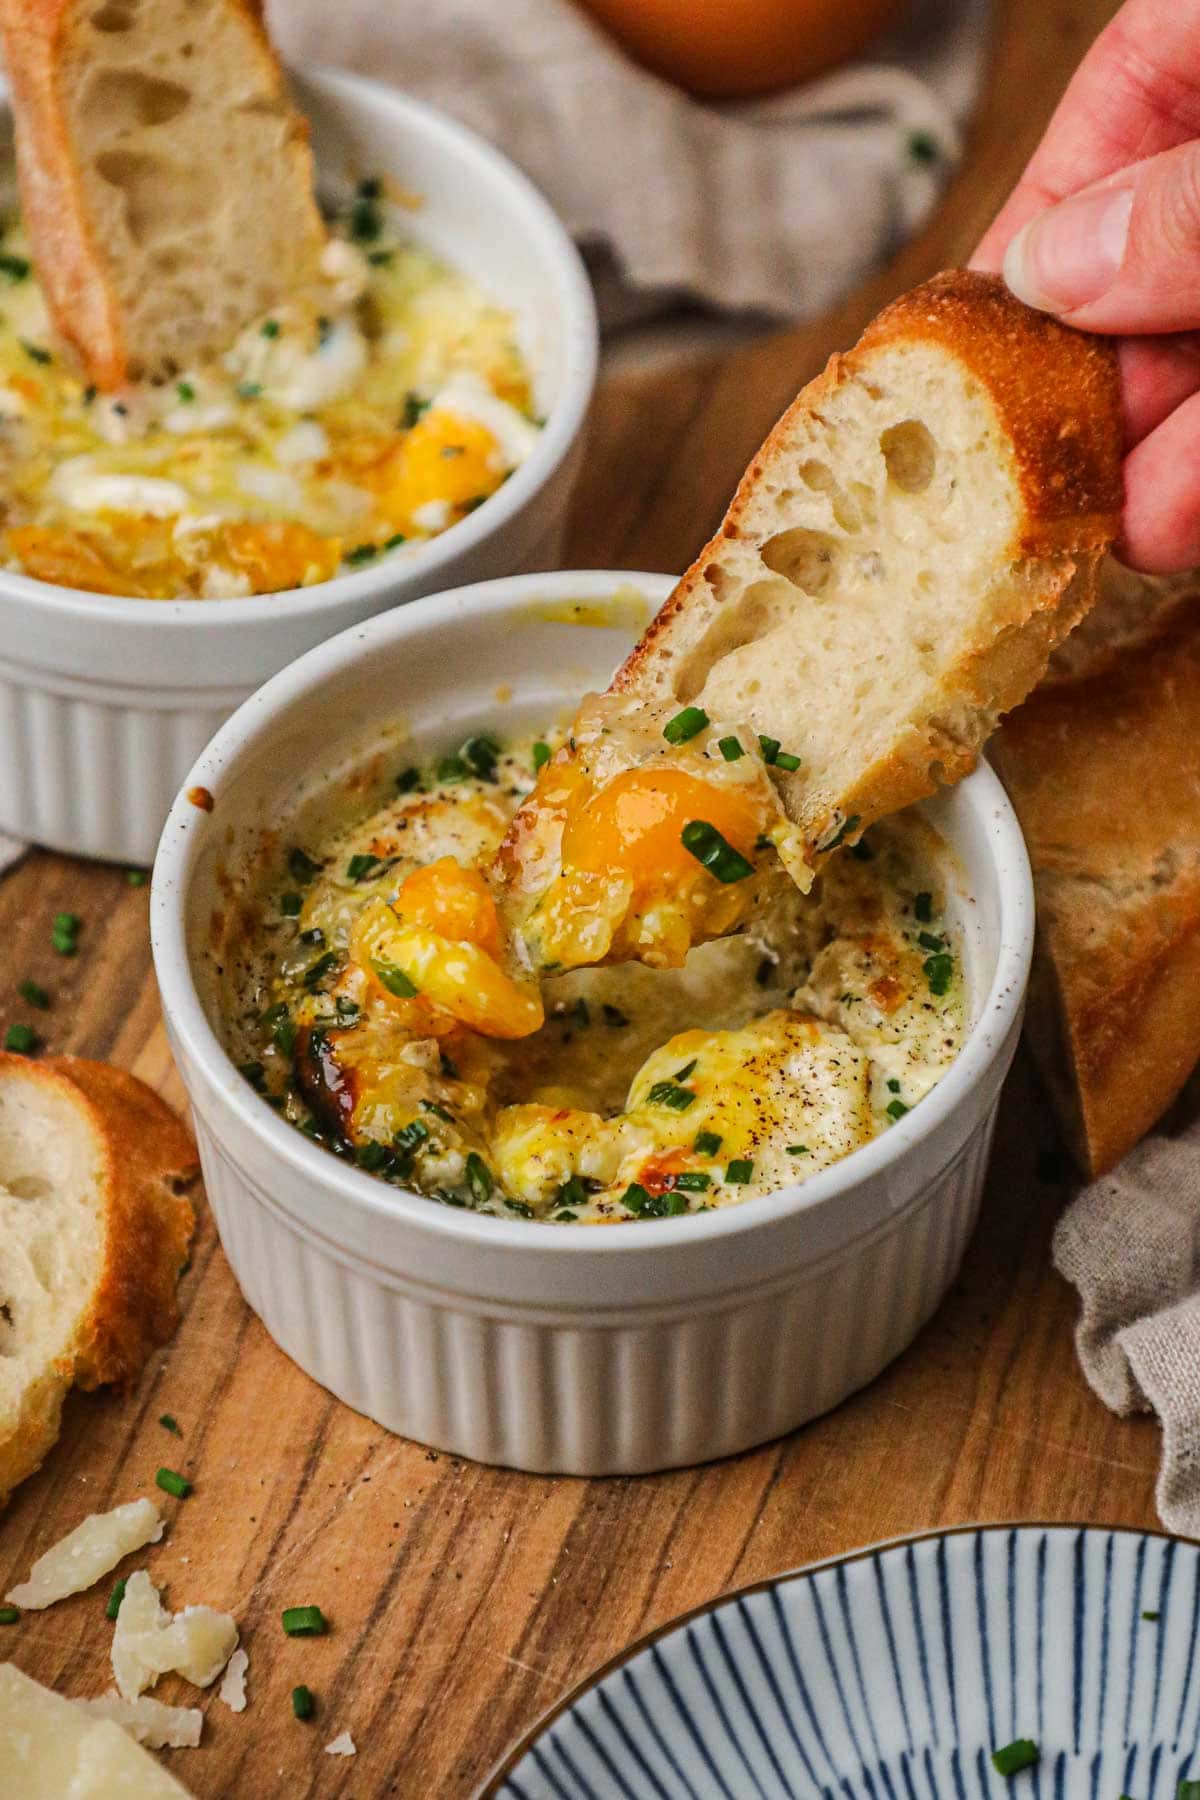 Hand dipping baguette in creamy, cheesy baked eggs with shallots and herbs.